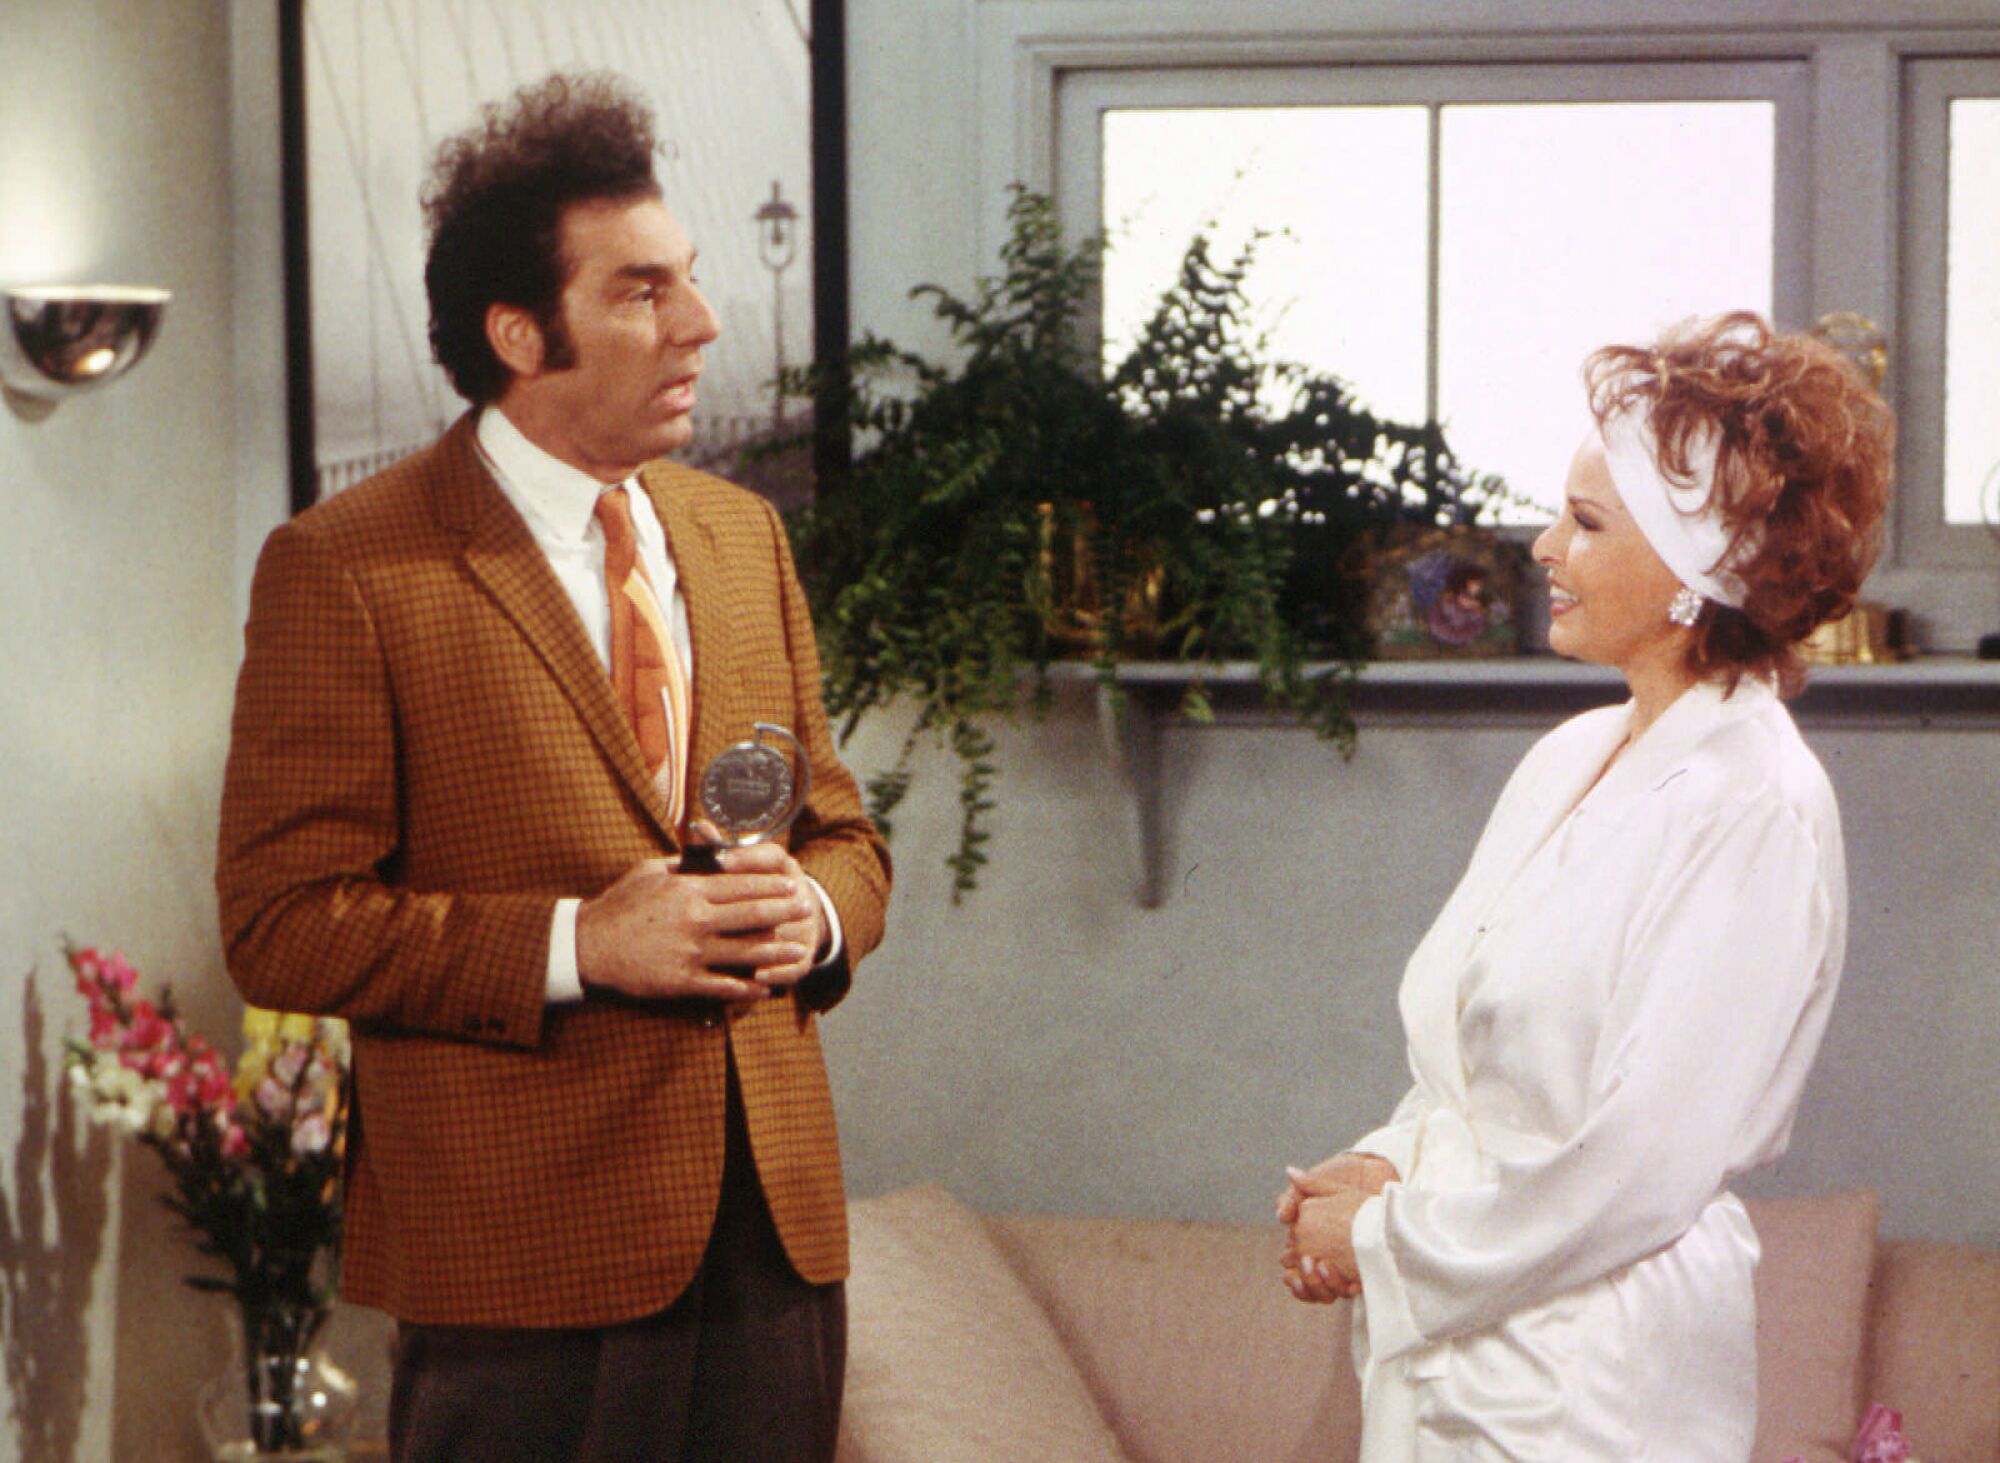 Raquel Welch, right, on set with Michael Richards